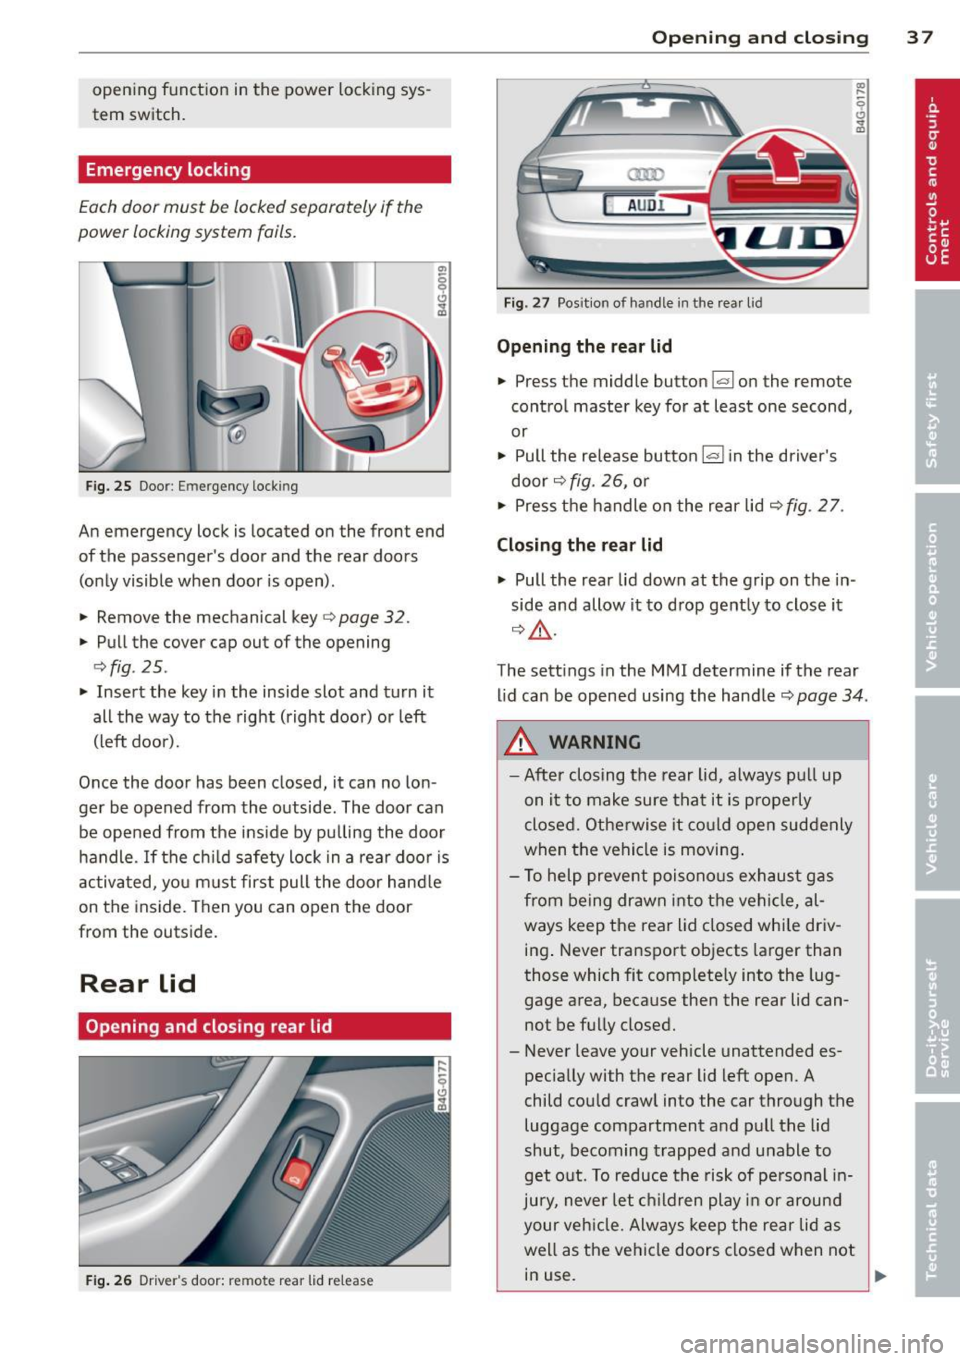 AUDI A6 2013 Owners Guide opening  function in the  power  locking sys­
tem  switch. 
Emergency  locking 
Each door  must  be locked separately  if the 
power  locking  system  fails. 
F ig. 25 Door: Emergency  locking 
An em